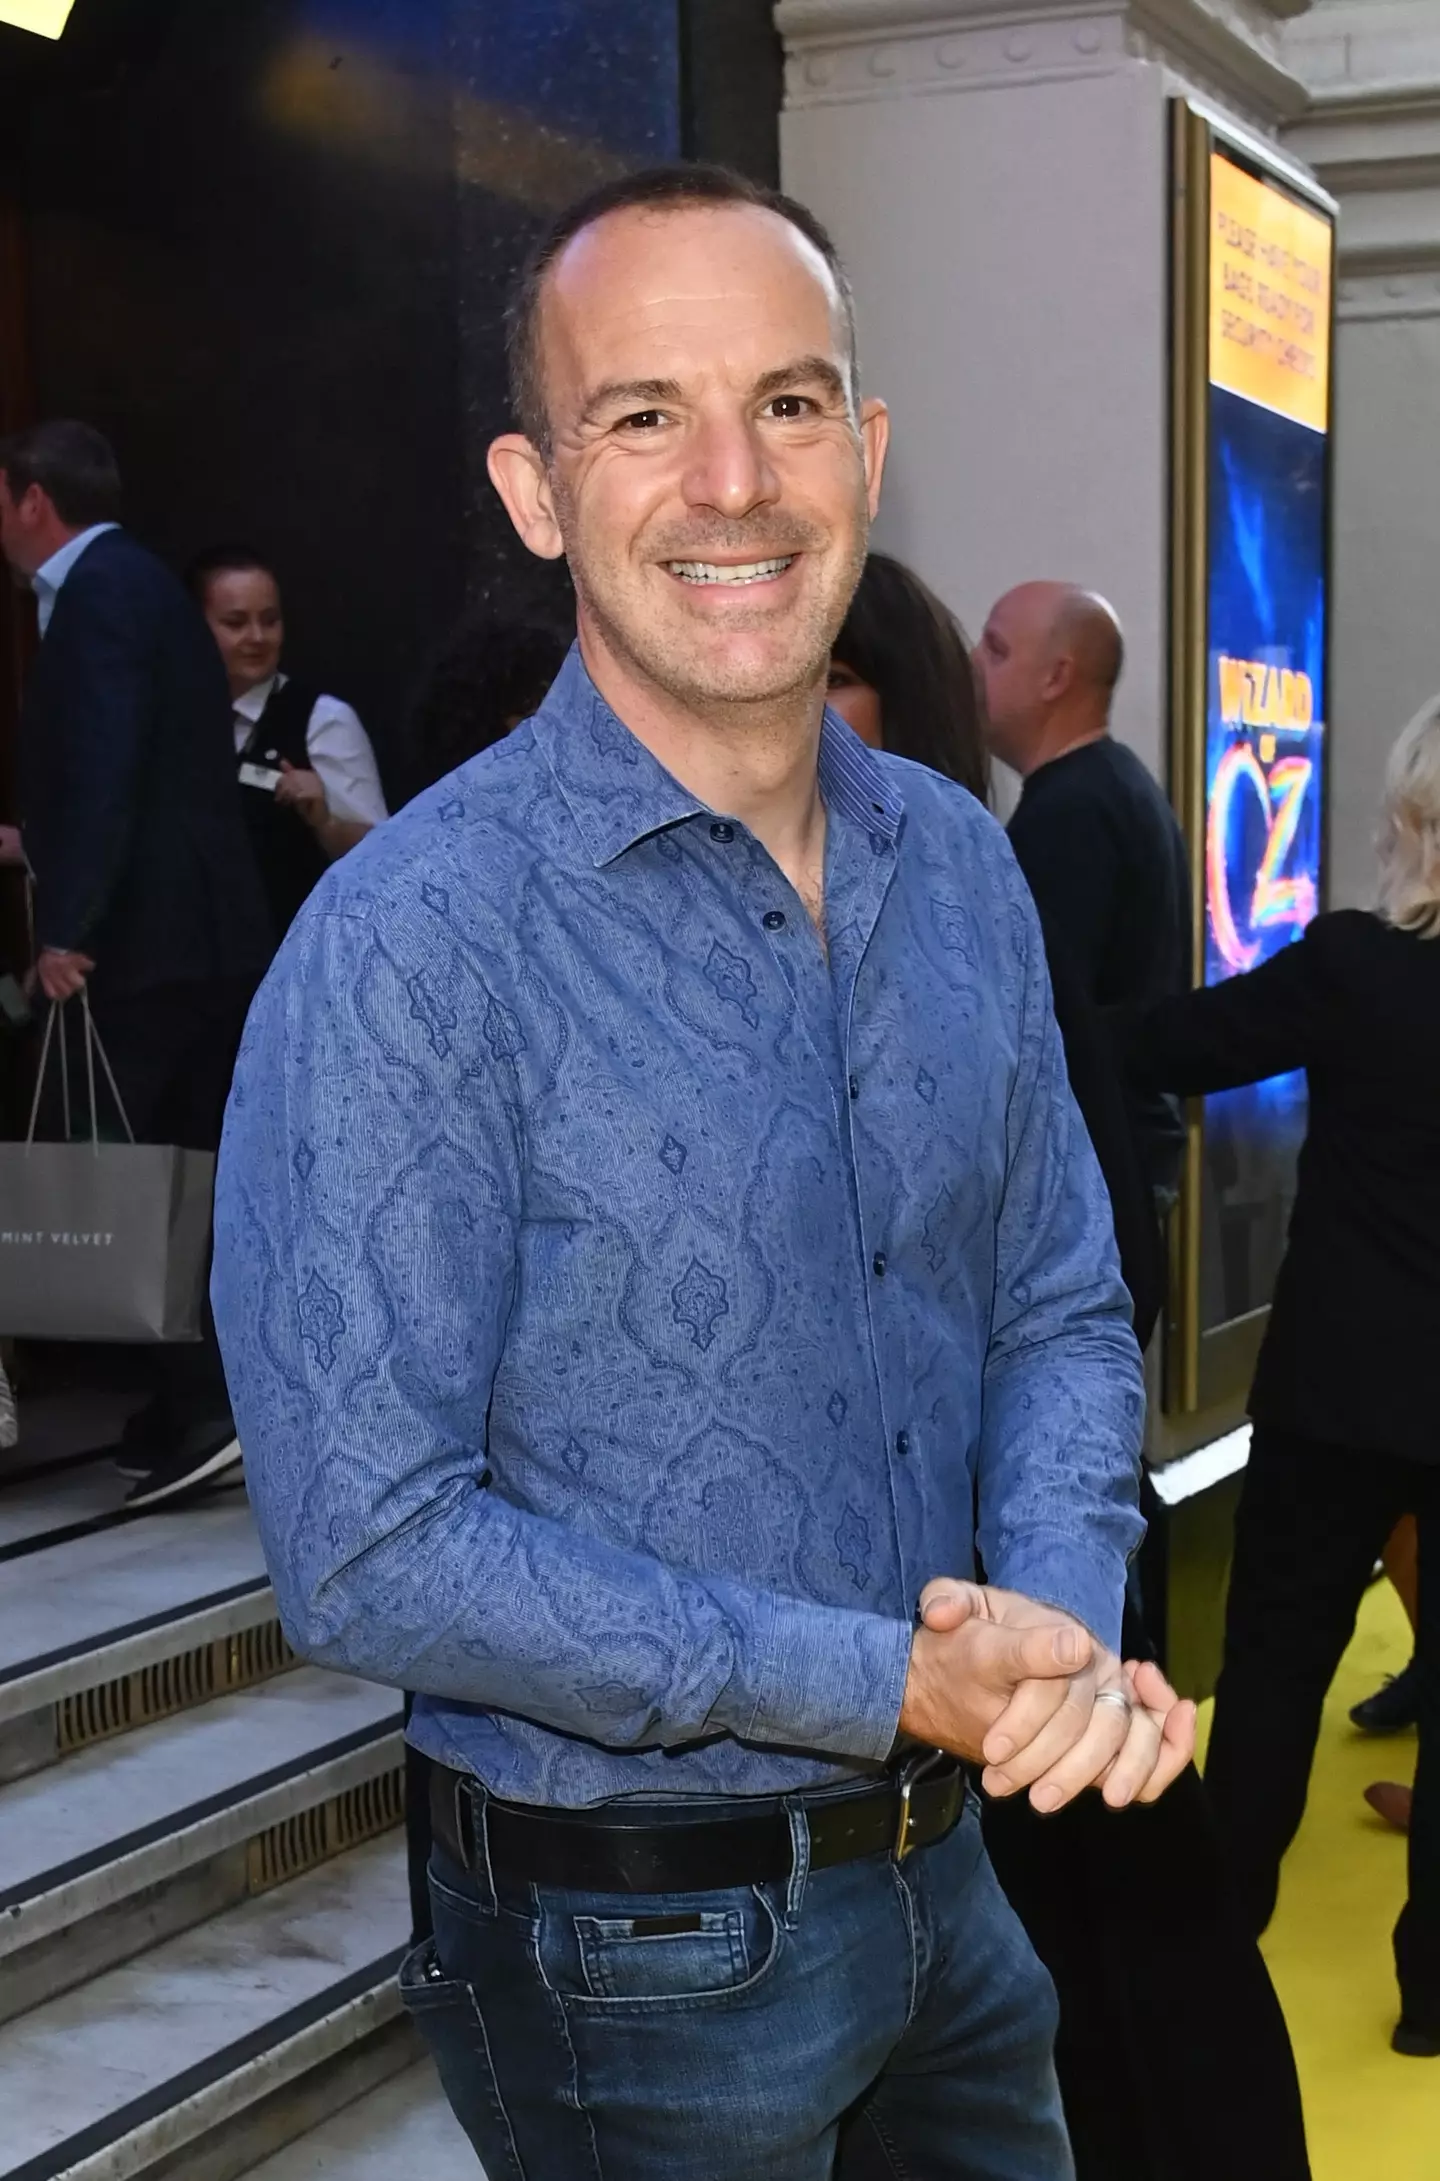 Martin Lewis has described the price hike as 'outrageous'.